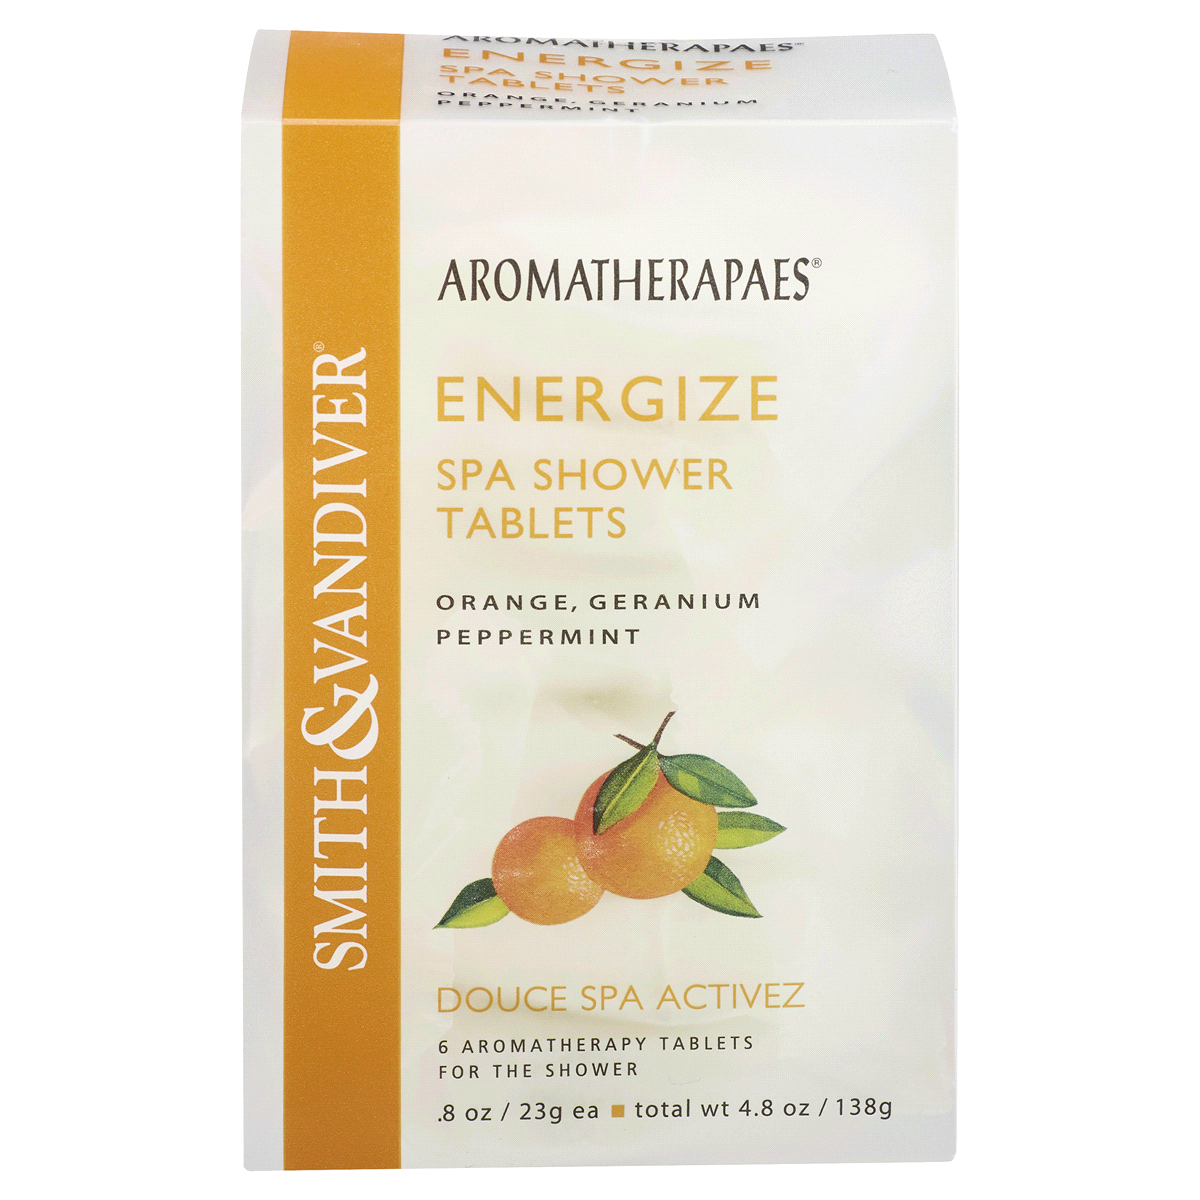 slide 1 of 1, Aromatherapaes Energize Spa Shower Tablets Orange, Geranium & Peppermint Aromatherapy Tablets, 6 ct